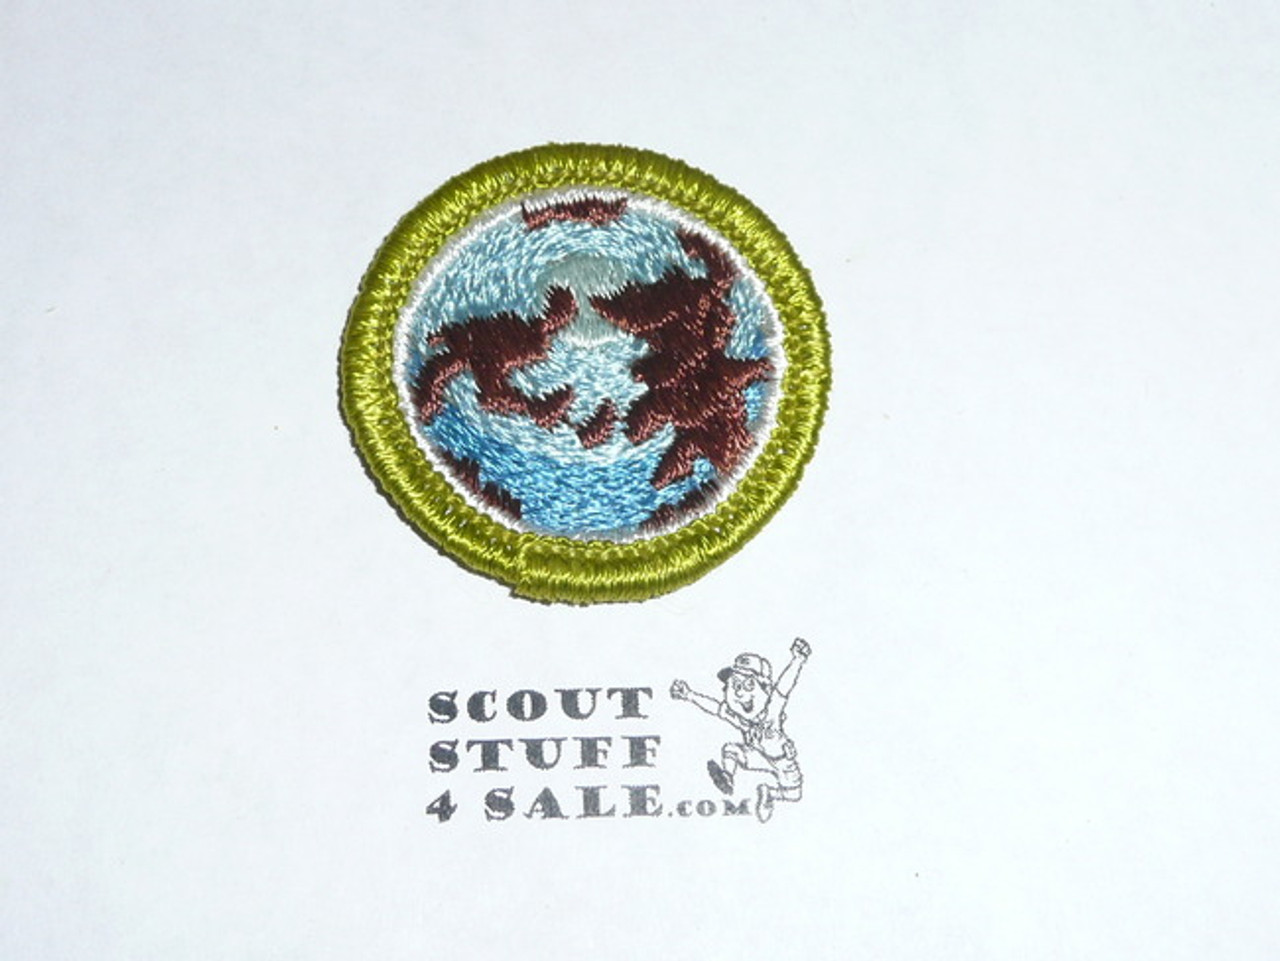 World Brotherhood (no hand)- Type G - Fully Embroidered Cloth Back Merit Badge (1961-1971)